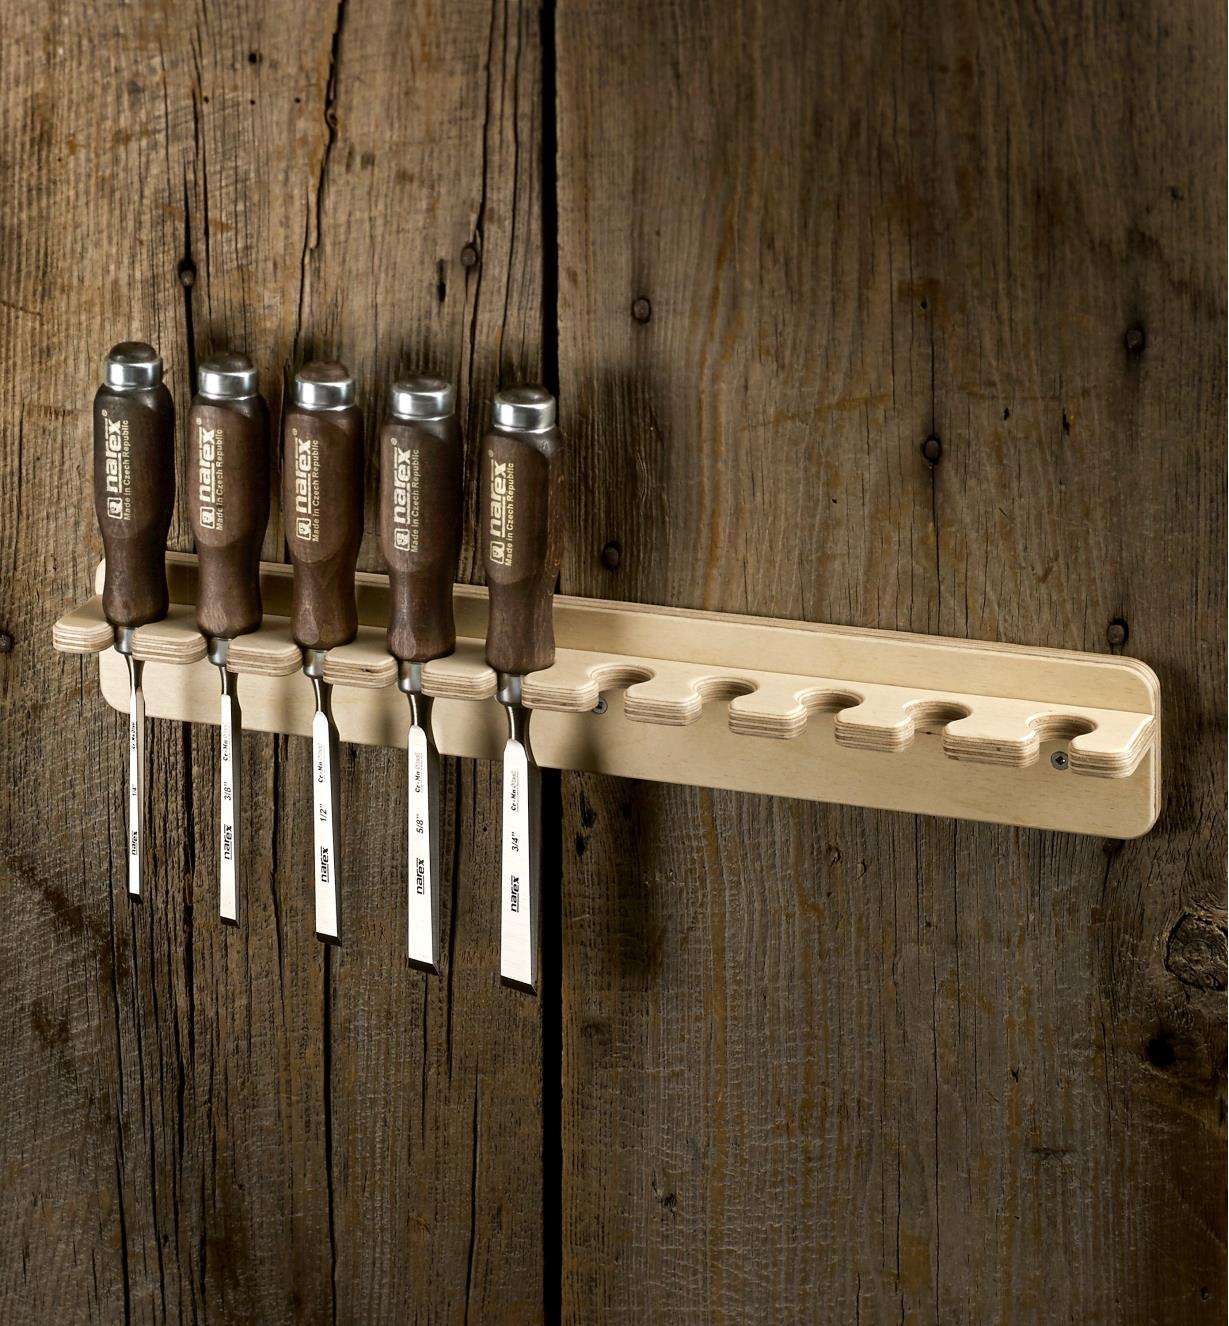 A wall rack for Narex bevel-edge chisels holding five chisels